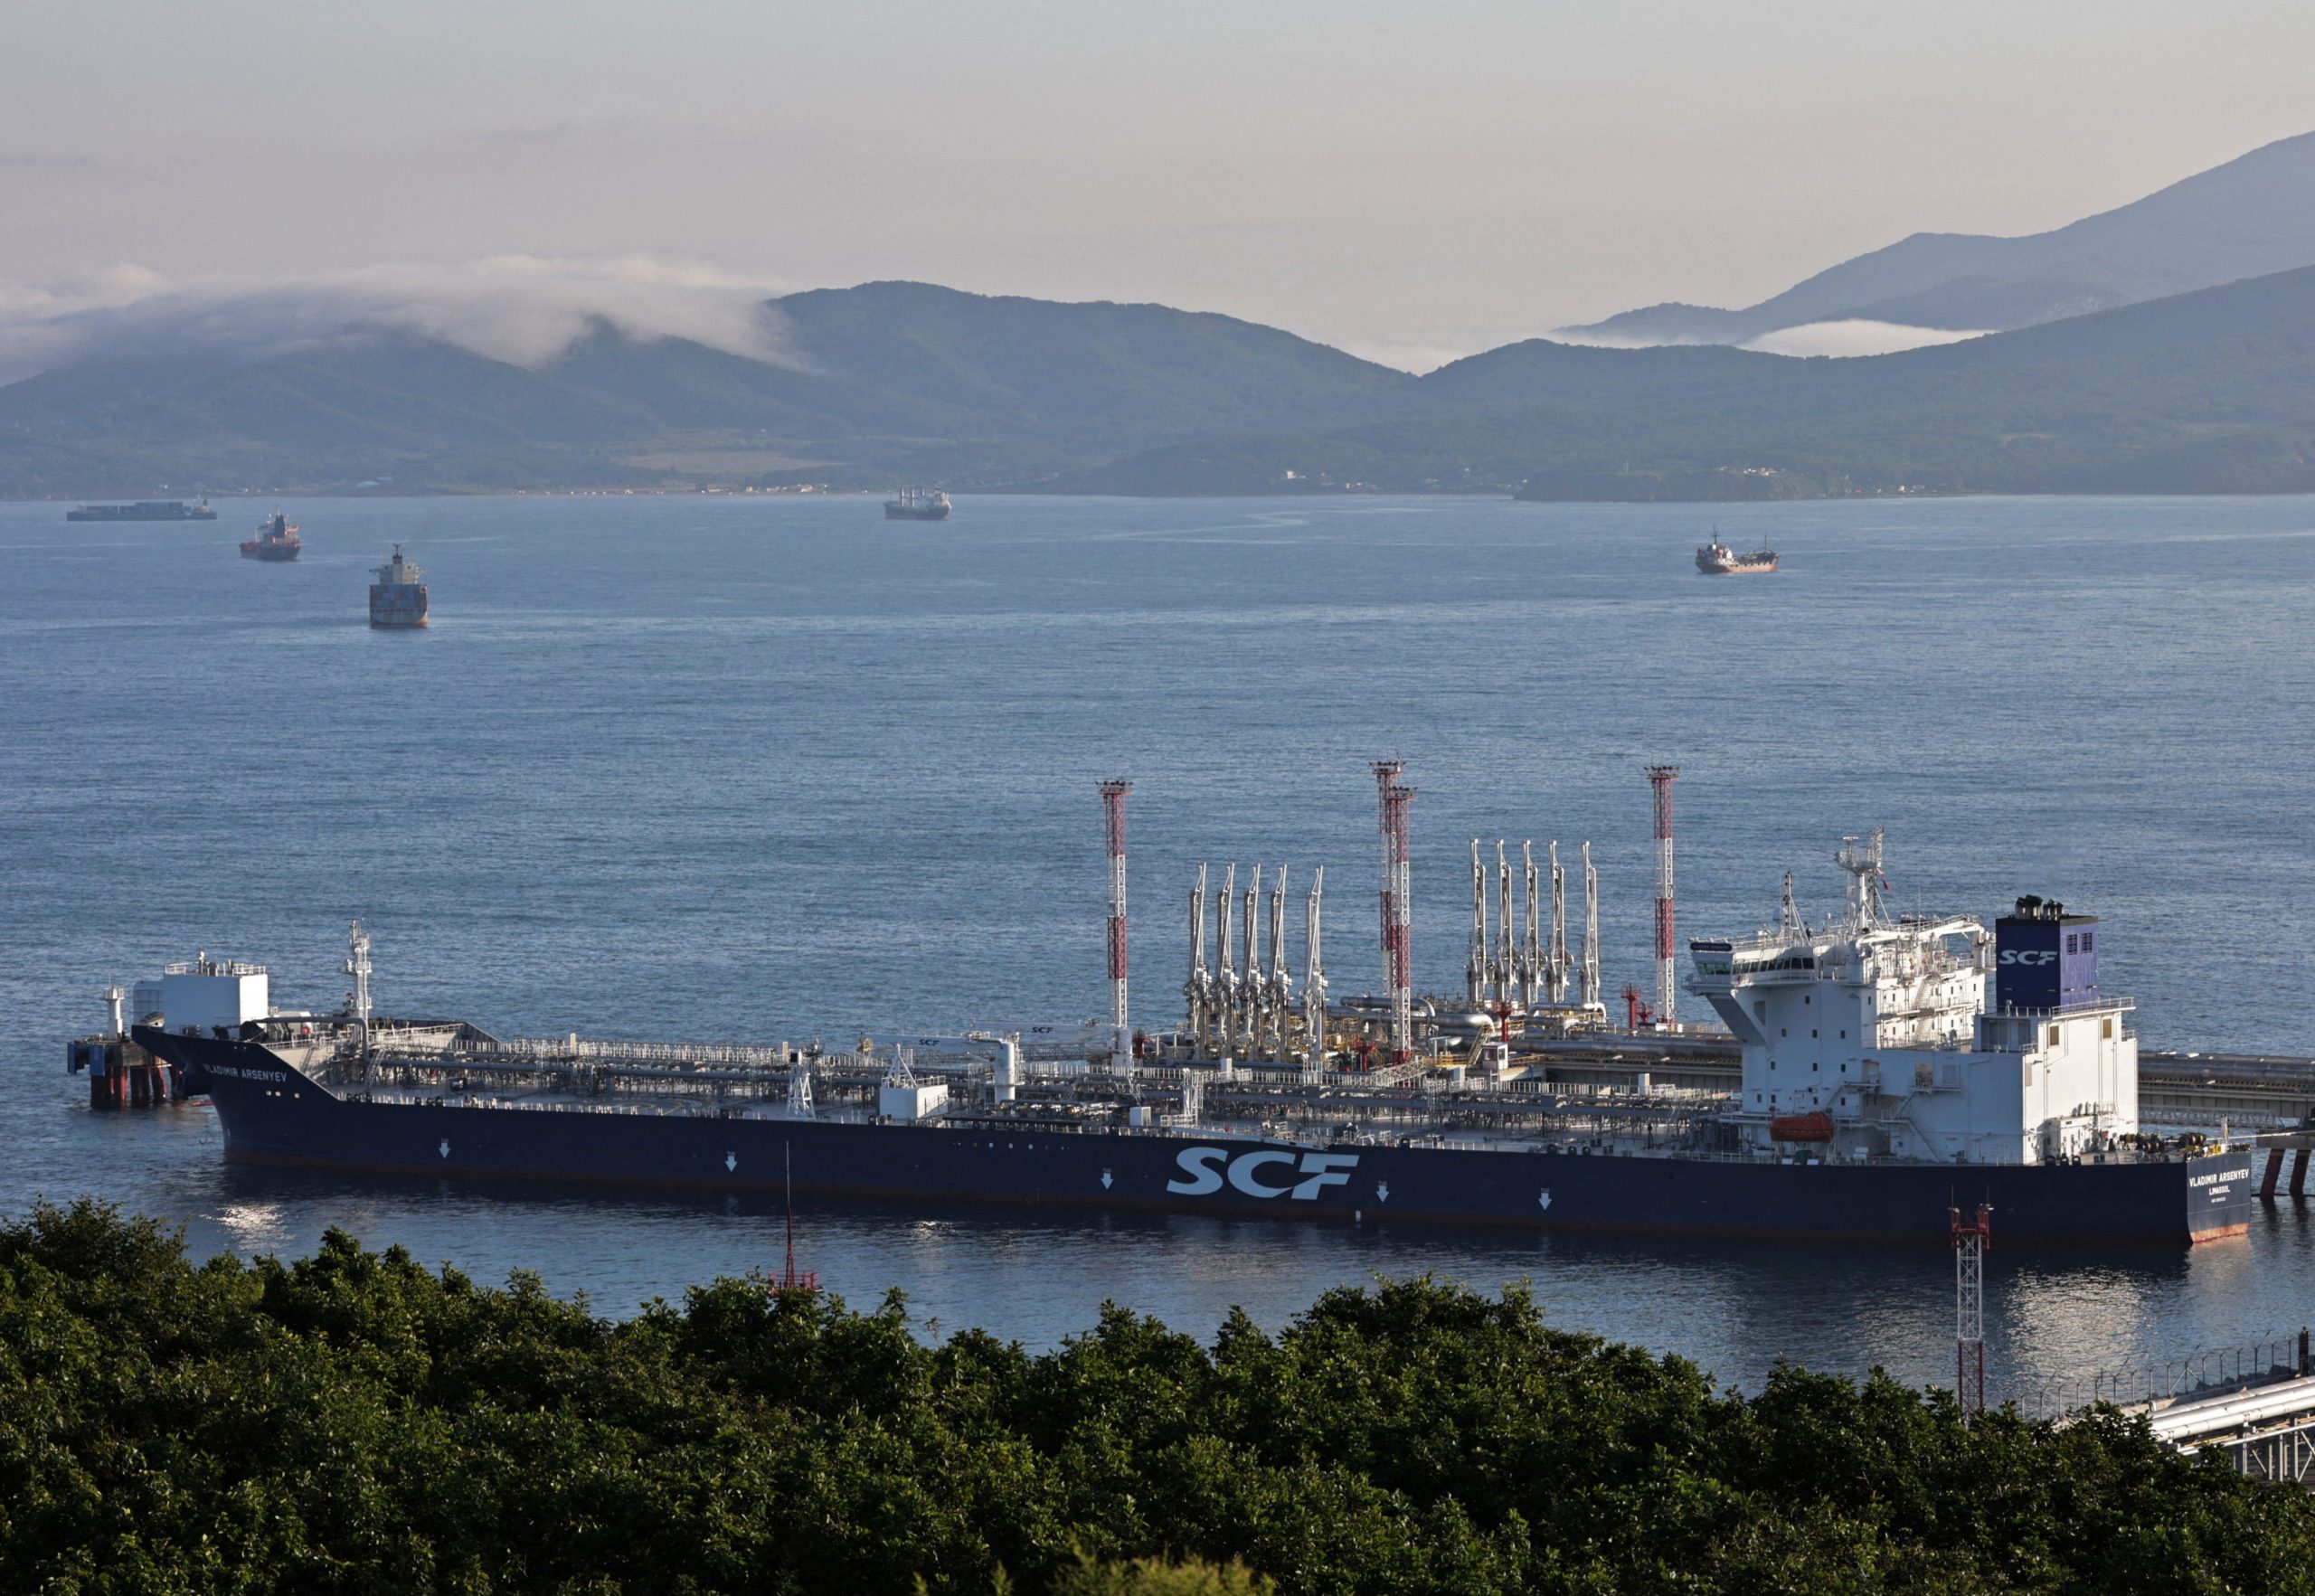 Russia’s Seaborne Crude Flows Climb with No Sign of Easing